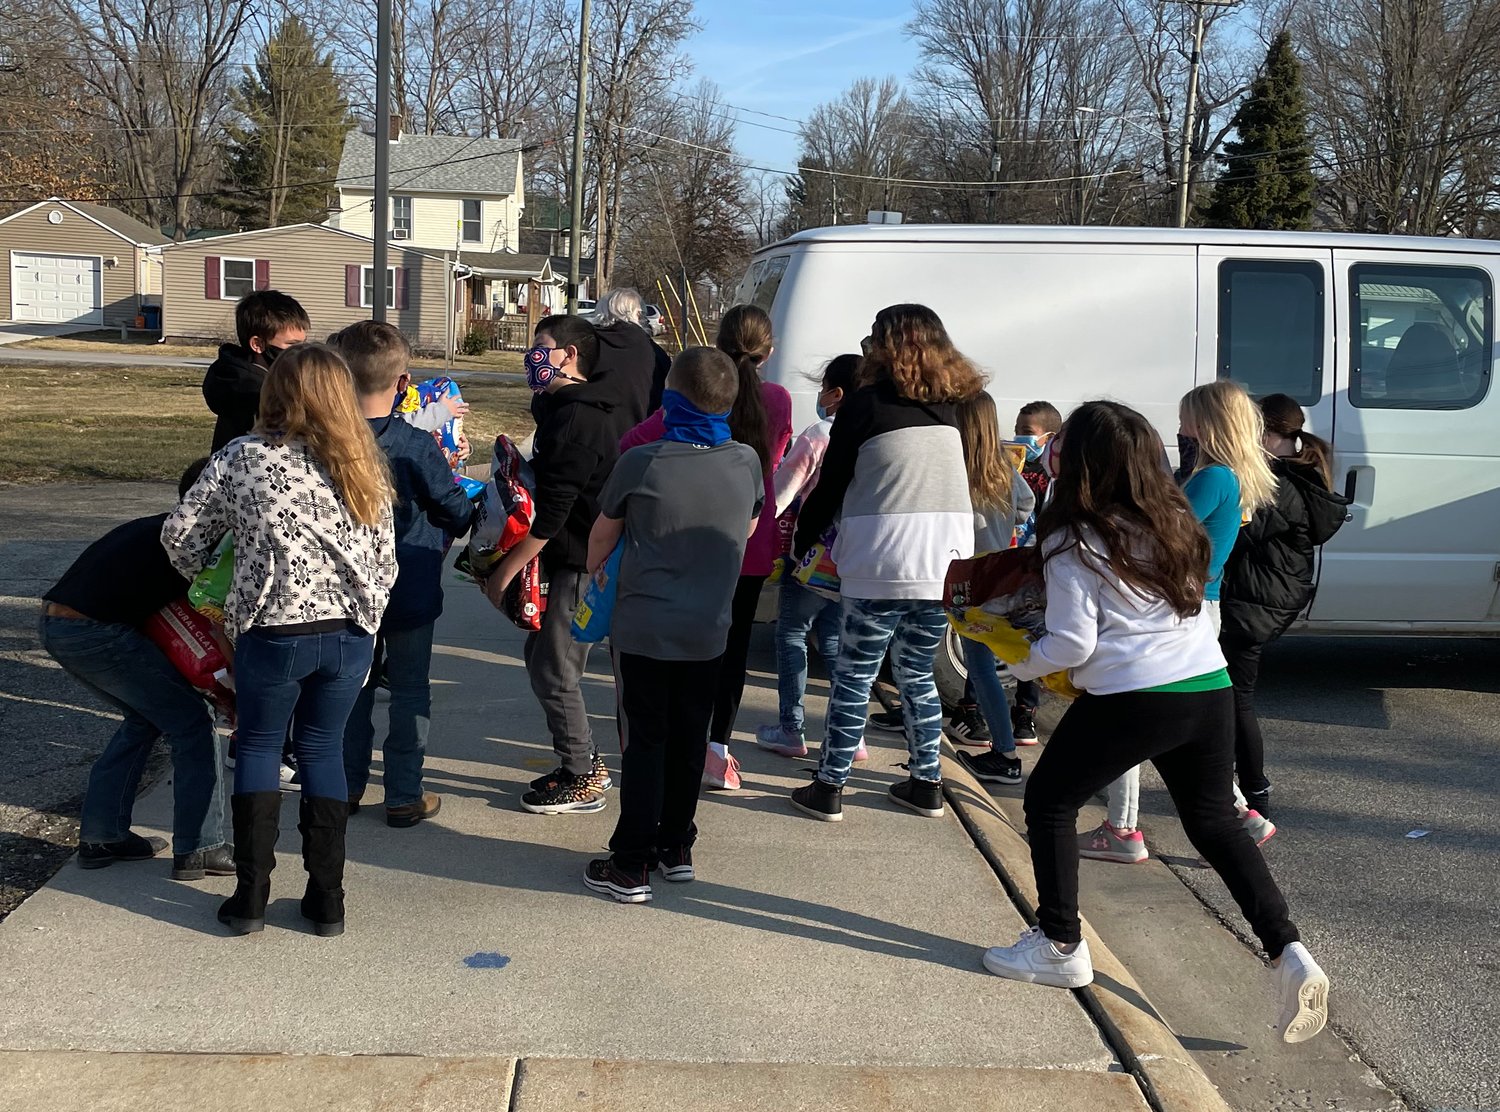 Hoover Elementary students carry donated pet food to a van for the Animal Welfare League of Montgomery County and the Home for Friendless Animals.